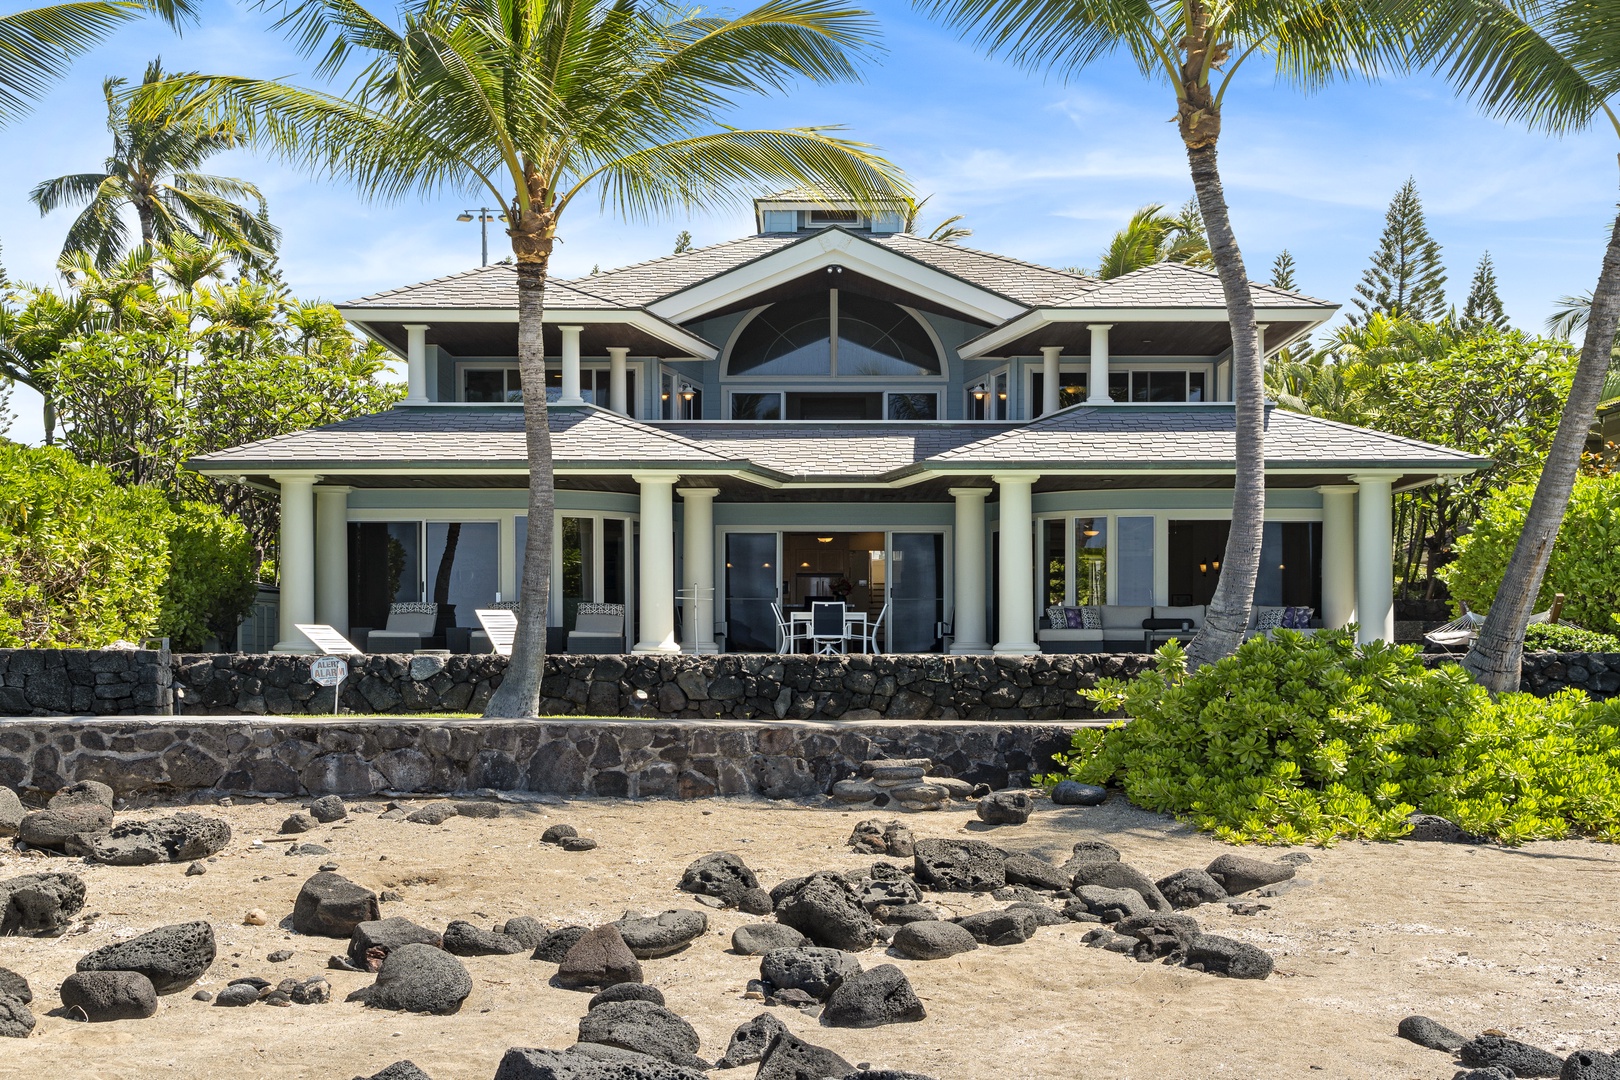 Kailua Kona Vacation Rentals, Kona Blue - Sandy area directly in front of the home!